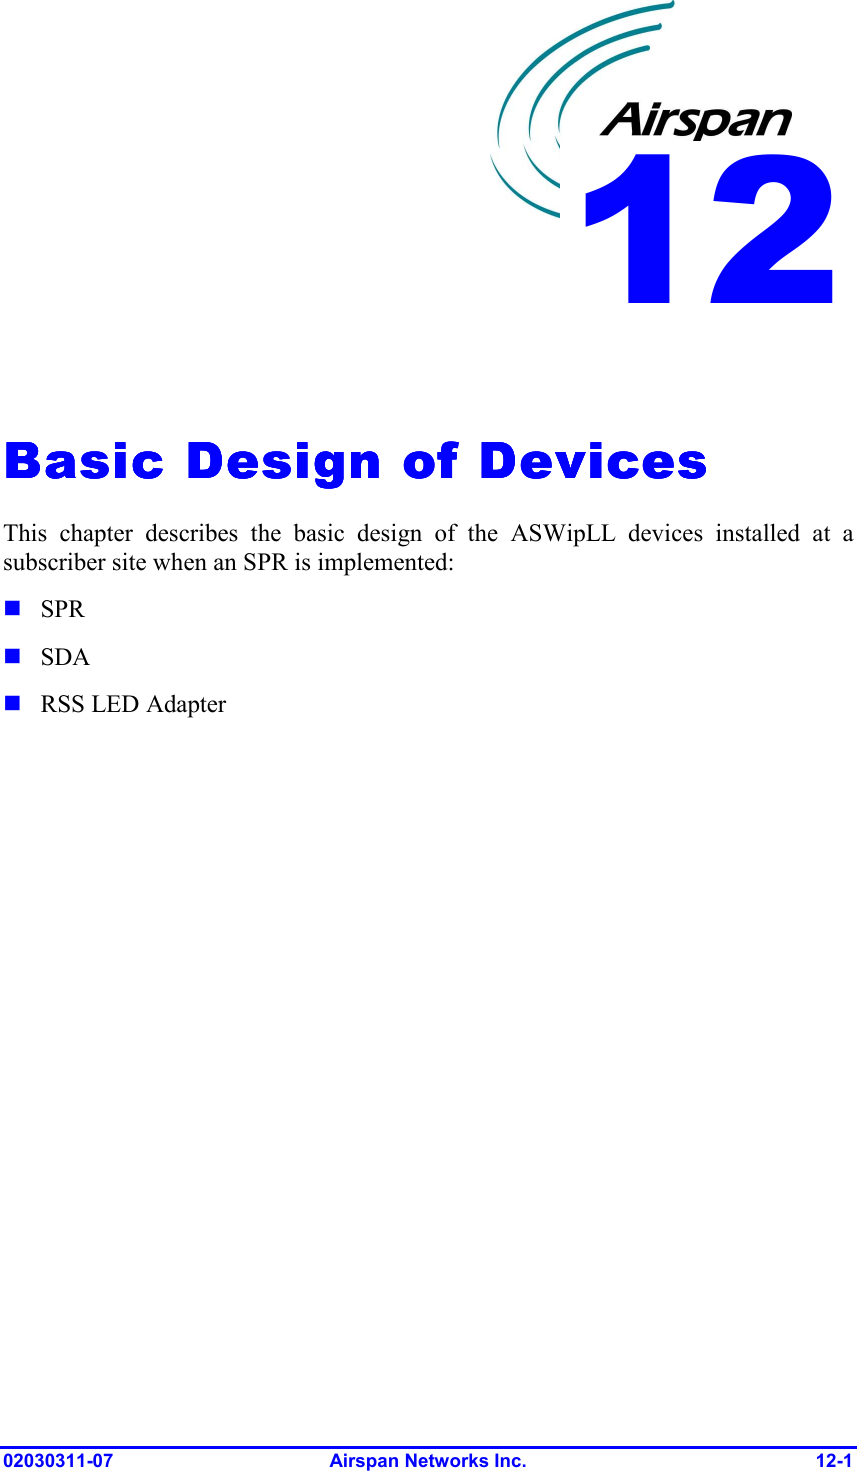  02030311-07 Airspan Networks Inc.  12-1   Basic Design of DevicesBasic Design of DevicesBasic Design of DevicesBasic Design of Devices    This chapter describes the basic design of the ASWipLL devices installed at a subscriber site when an SPR is implemented: ! SPR ! SDA ! RSS LED Adapter  12